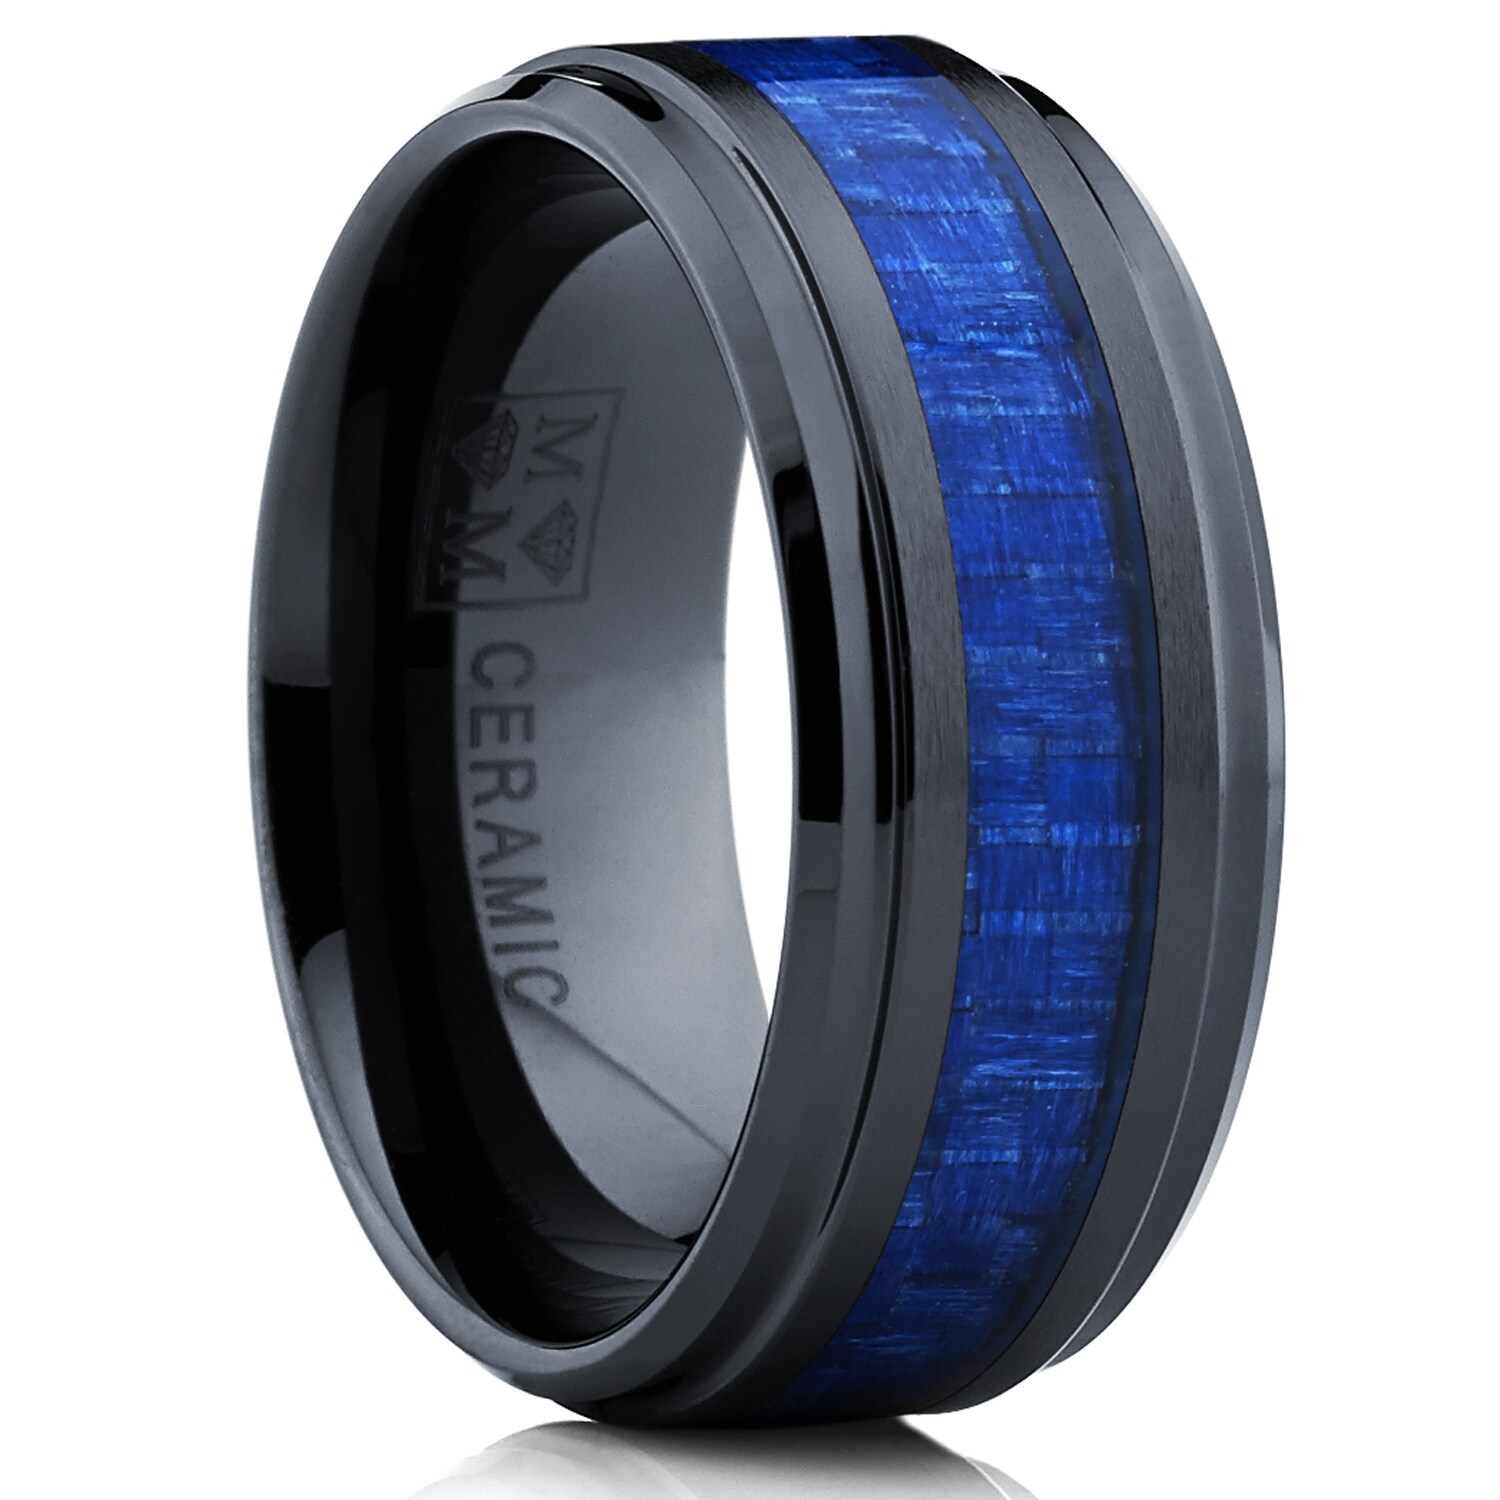 8MM Dome Mens Black Ceramic Ring Wedding Band with Blue Carbon Fiber Inlay Sizes 5 to 15